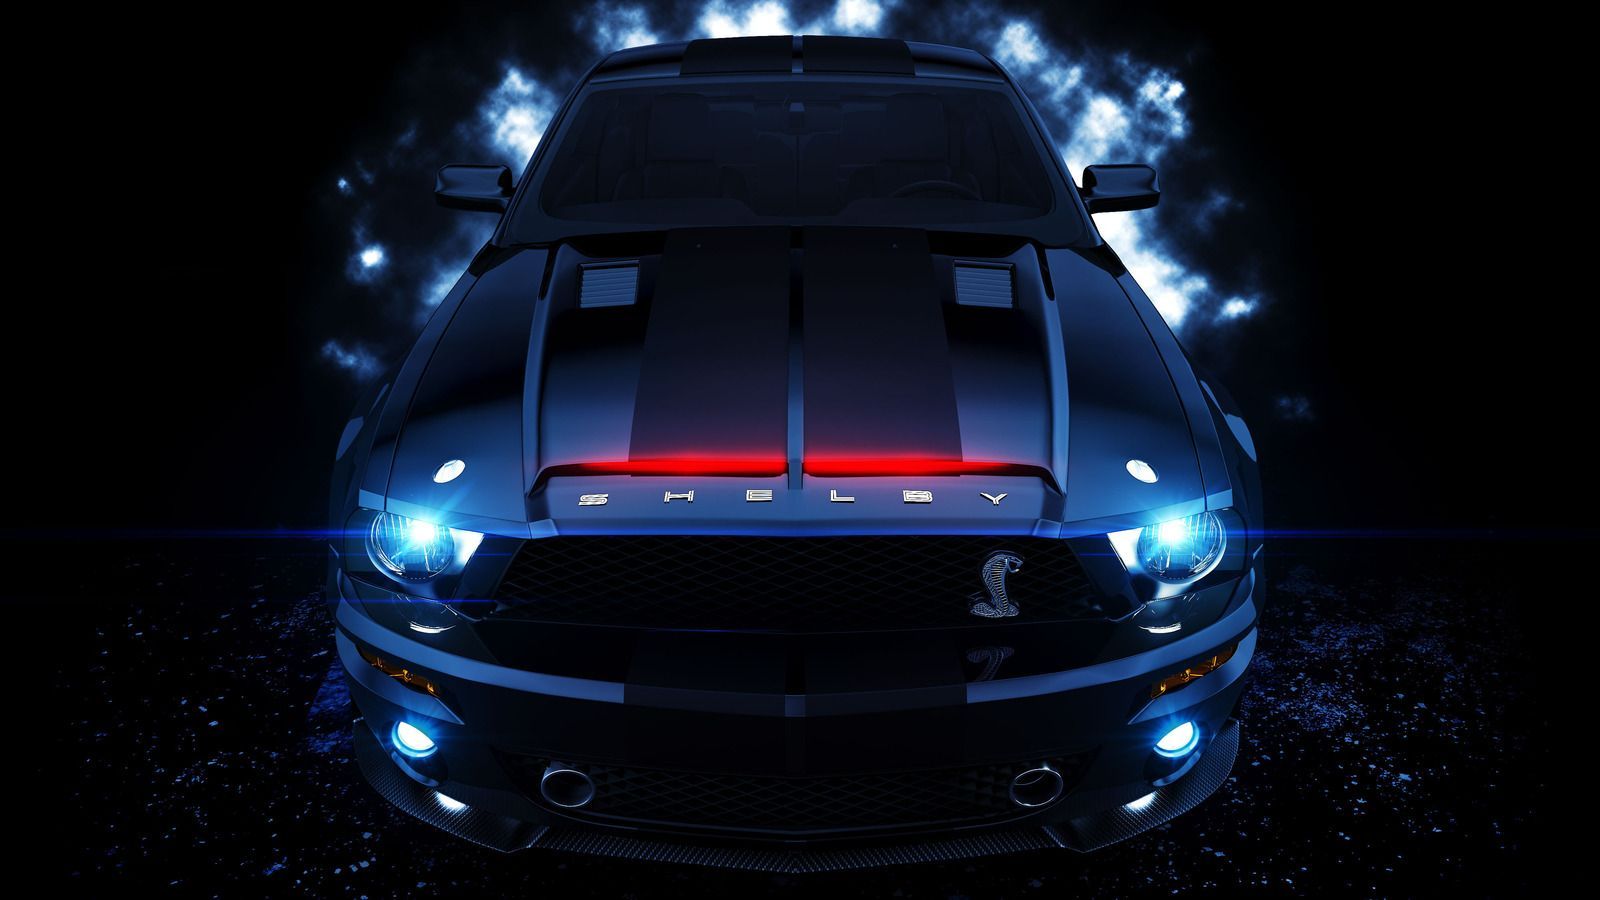 Ford Mustang Gt Hd Wallpaper Cave